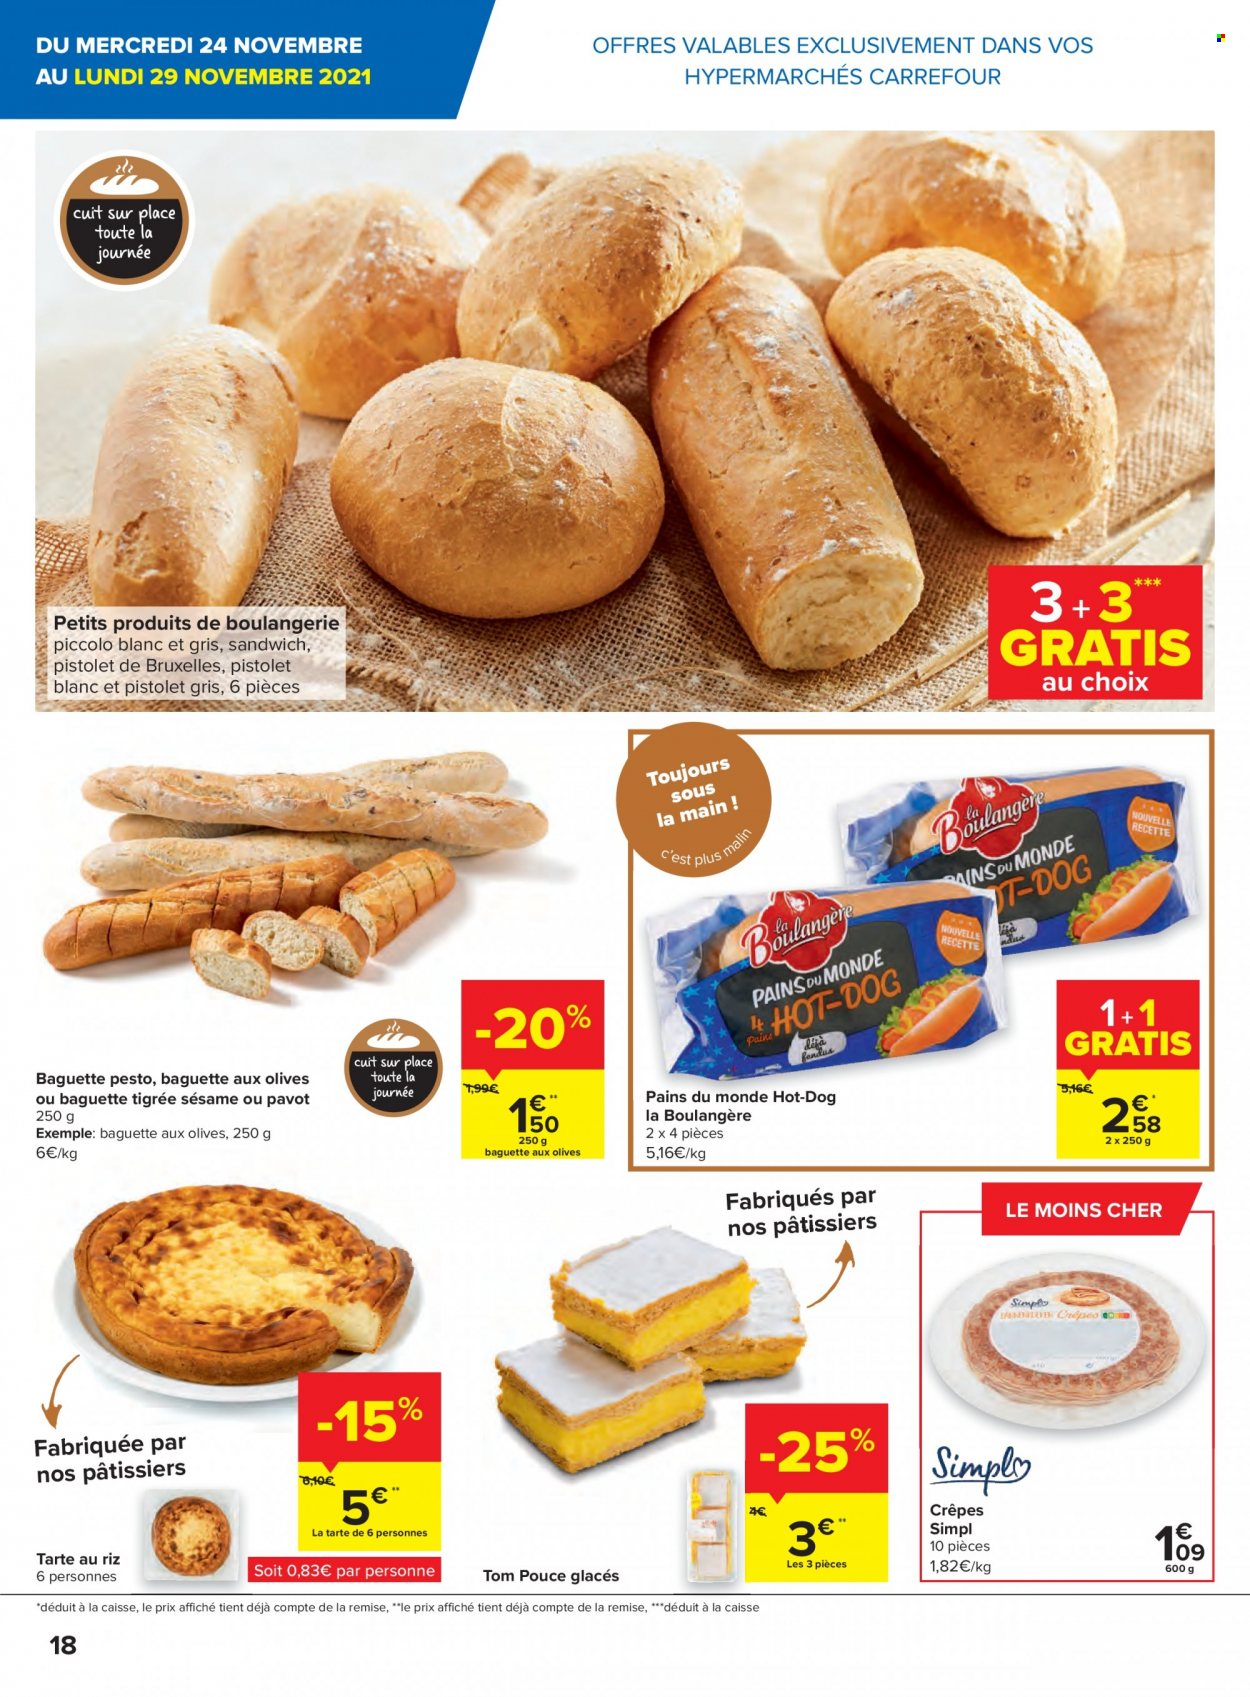 Catalogue Carrefour hypermarkt - 24.11.2021 - 6.12.2021. Page 18.